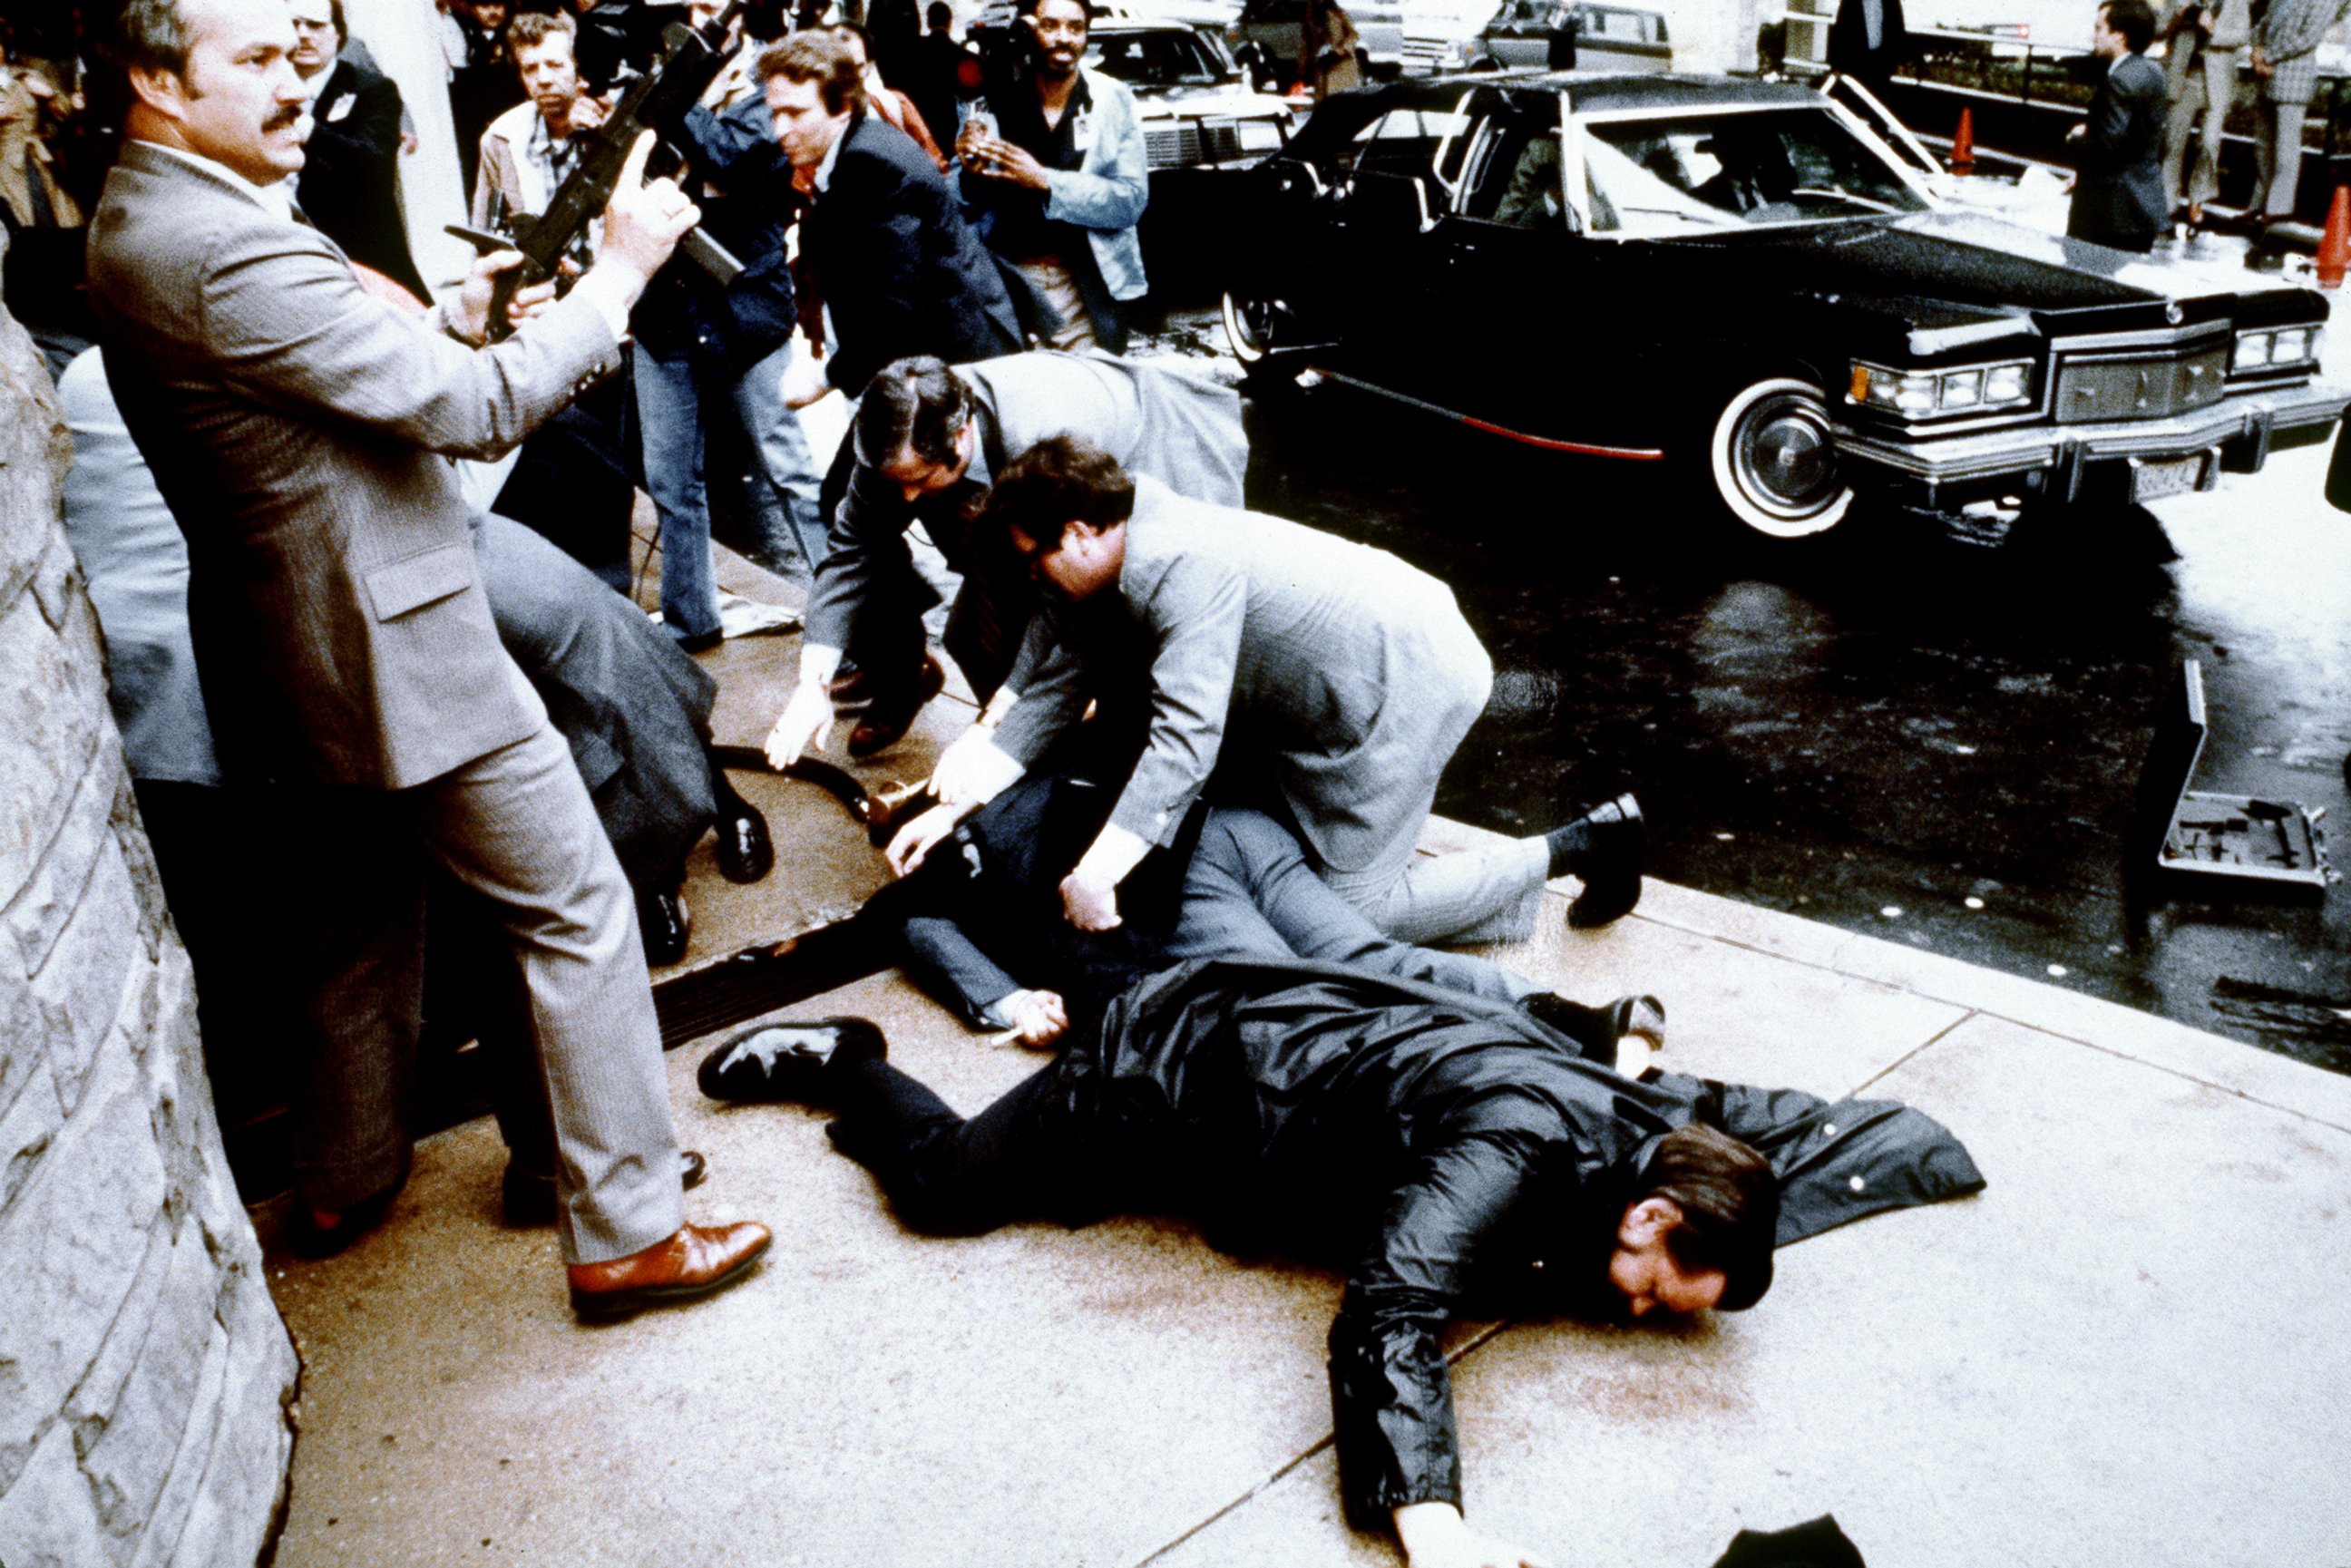 PHOTO: This photo taken by presidential photographer Mike Evens on March 30, 1981 shows police and Secret Service agents reacting during the assassination attempt on then US president Ronald Reagan, after a conference in Washington, D.C.